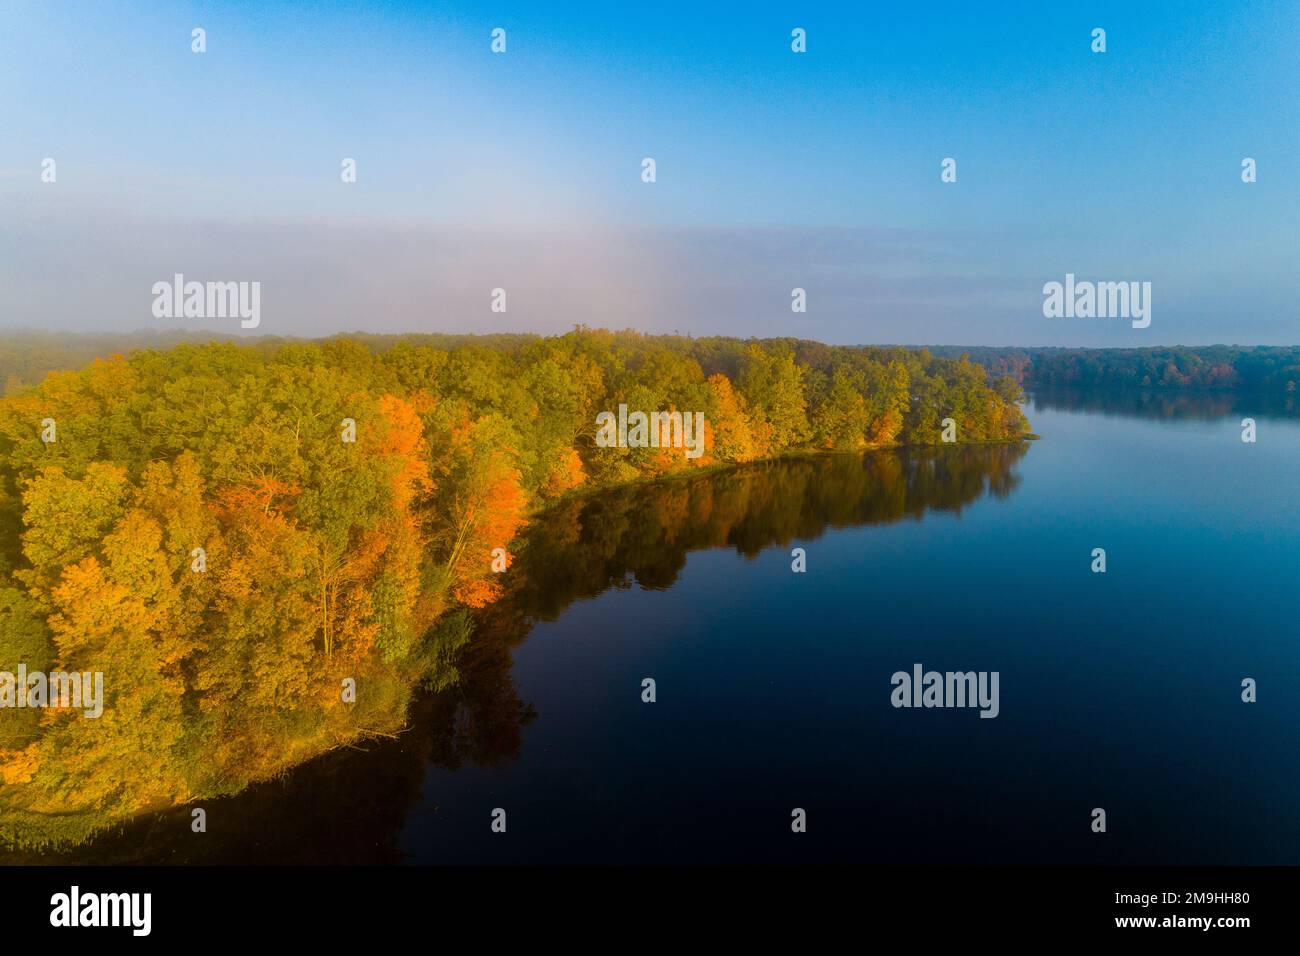 Lake with forest on shore in autumn, Stephen A. Forbes State Park, Marion County, Illinois, USA Stock Photo